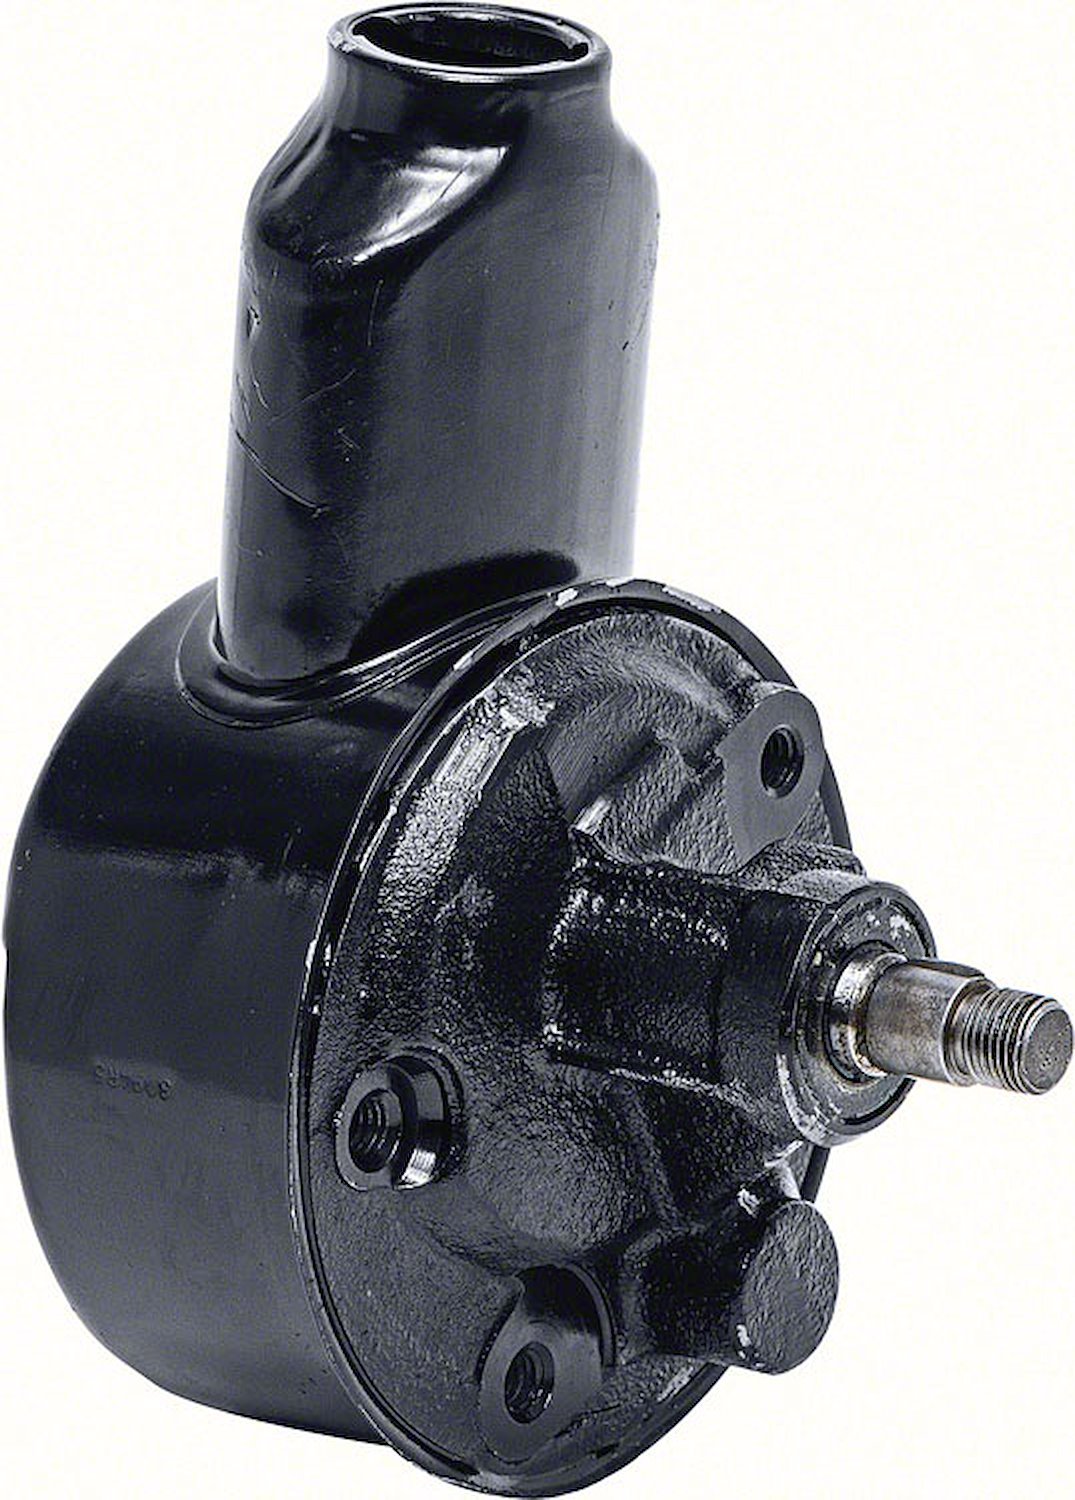 A6078 Power Steering Pump for 1961-1966 Chevrolet Bel Air, Biscayne, Caprice, Impala